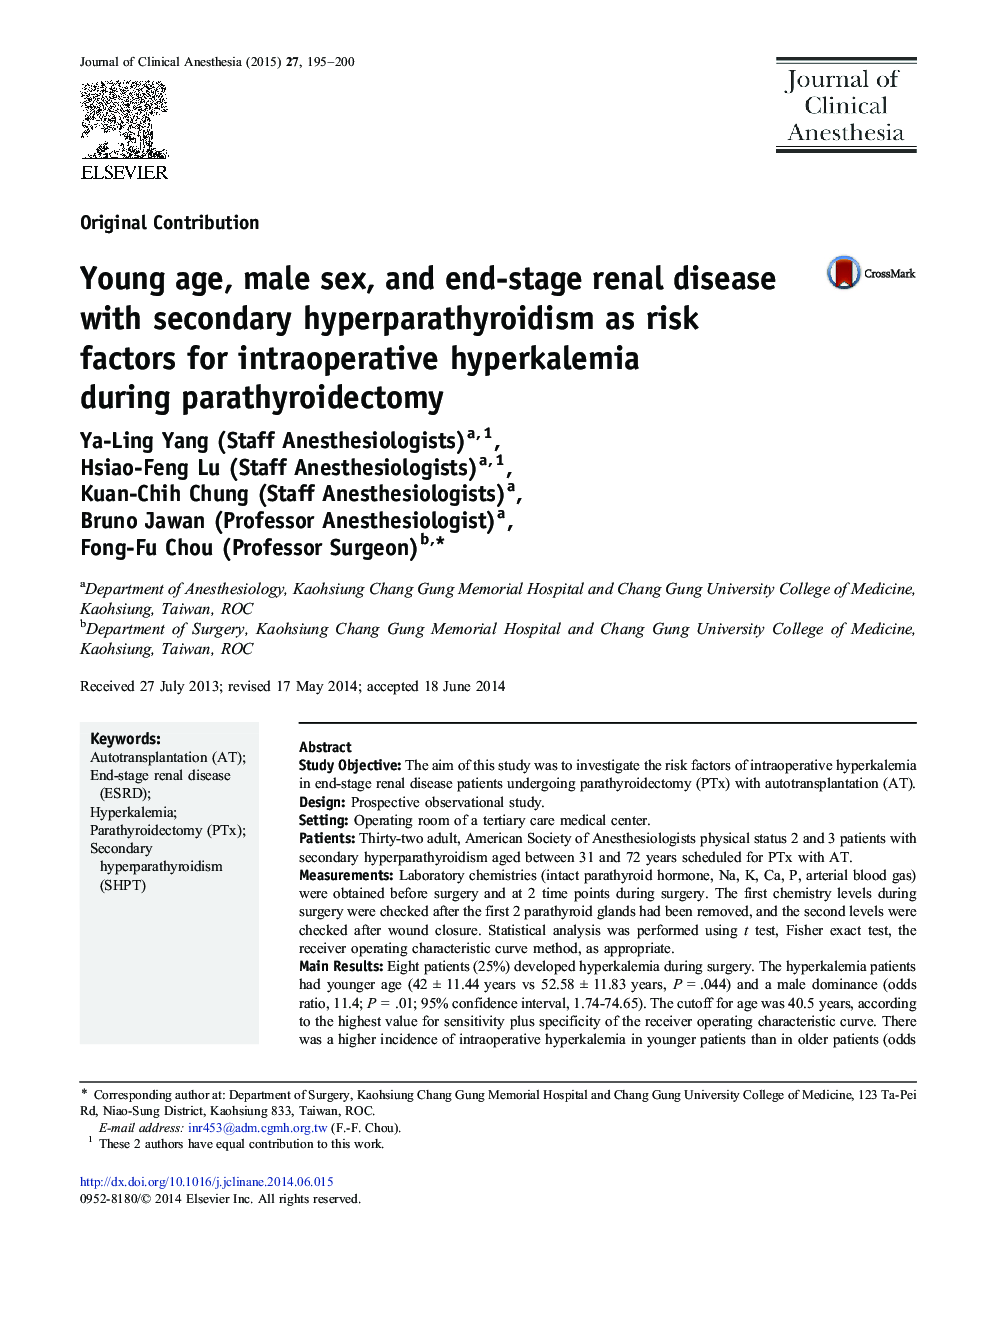 Young age, male sex, and end-stage renal disease with secondary hyperparathyroidism as risk factors for intraoperative hyperkalemia during parathyroidectomy